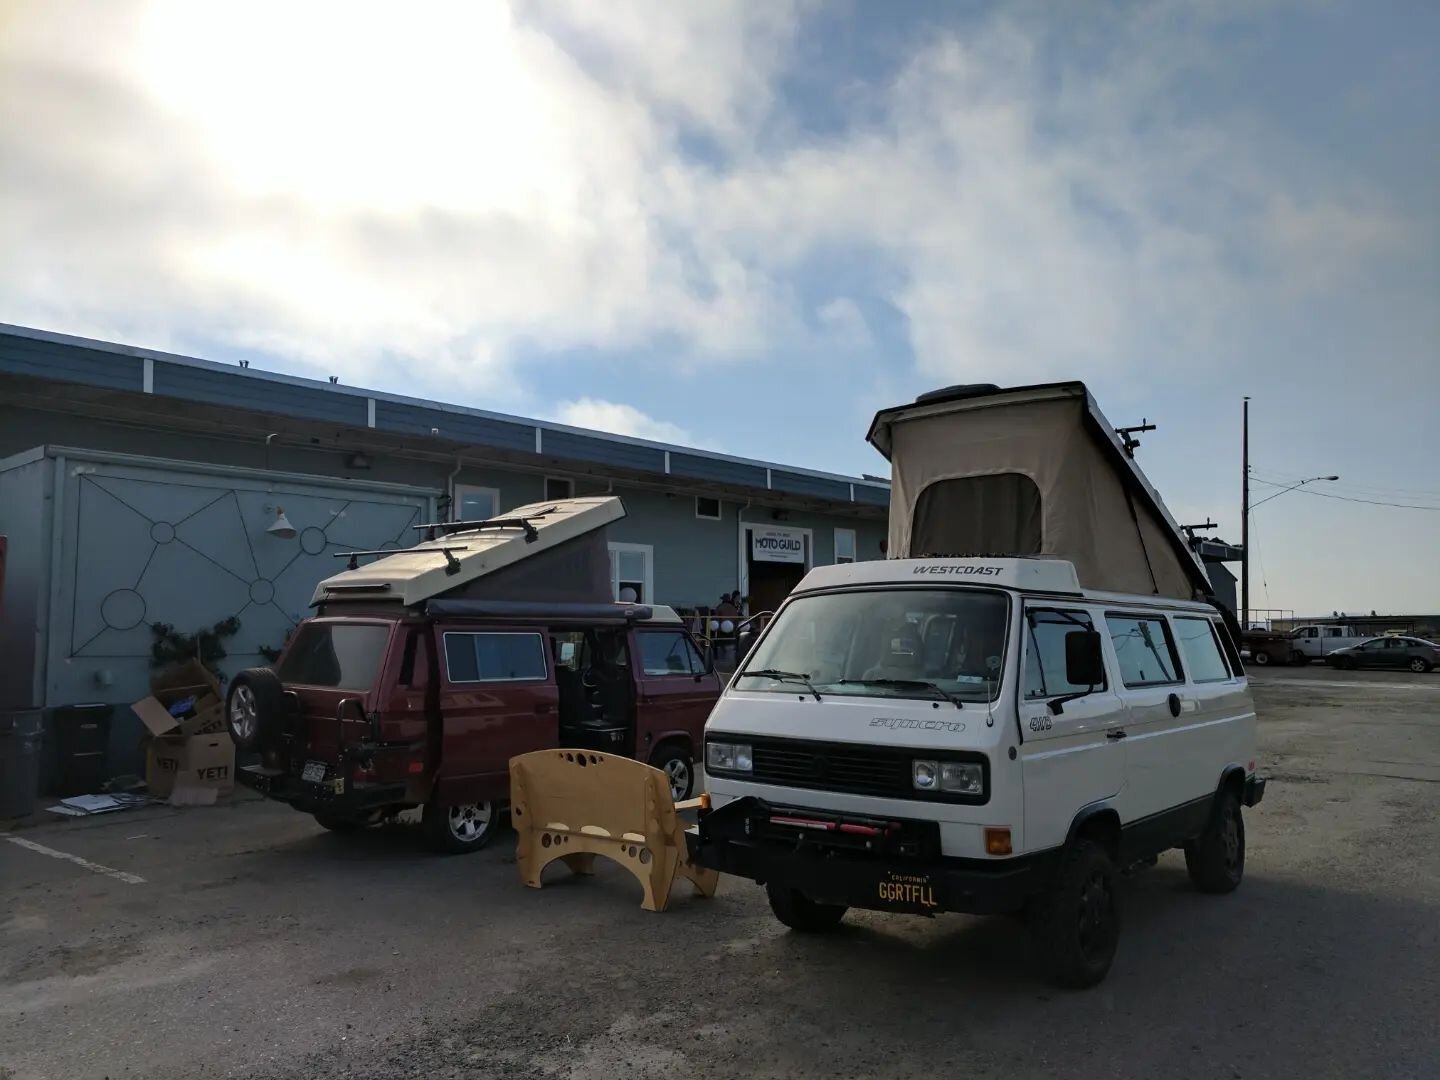 Partying at a warehouse on treasure island with your hotel on wheels out front. Vans are awesome.